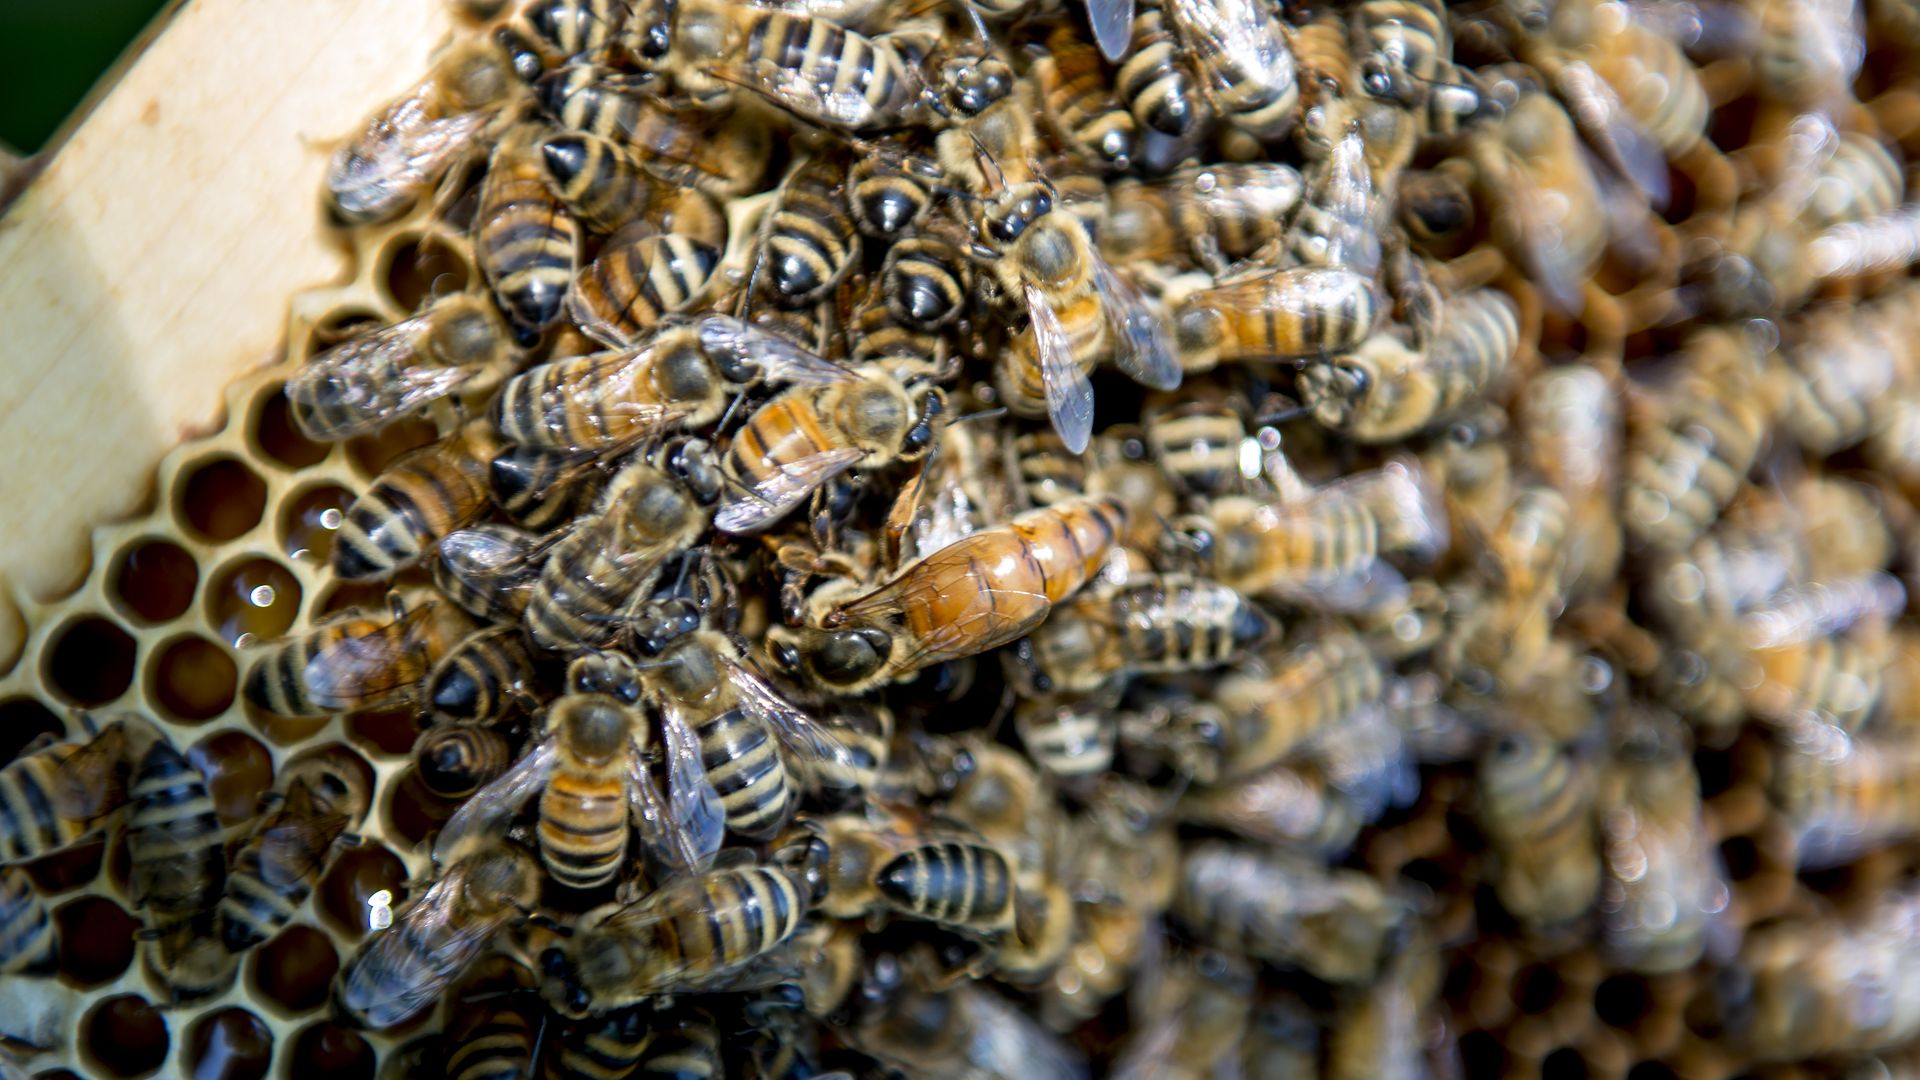 A queen Carniolan honey bee, center, climb on the frame of a hive owned by Bureau County Honey Co. near Hennepin, Illinois, U.S., on Thursday, July 3, 2014.